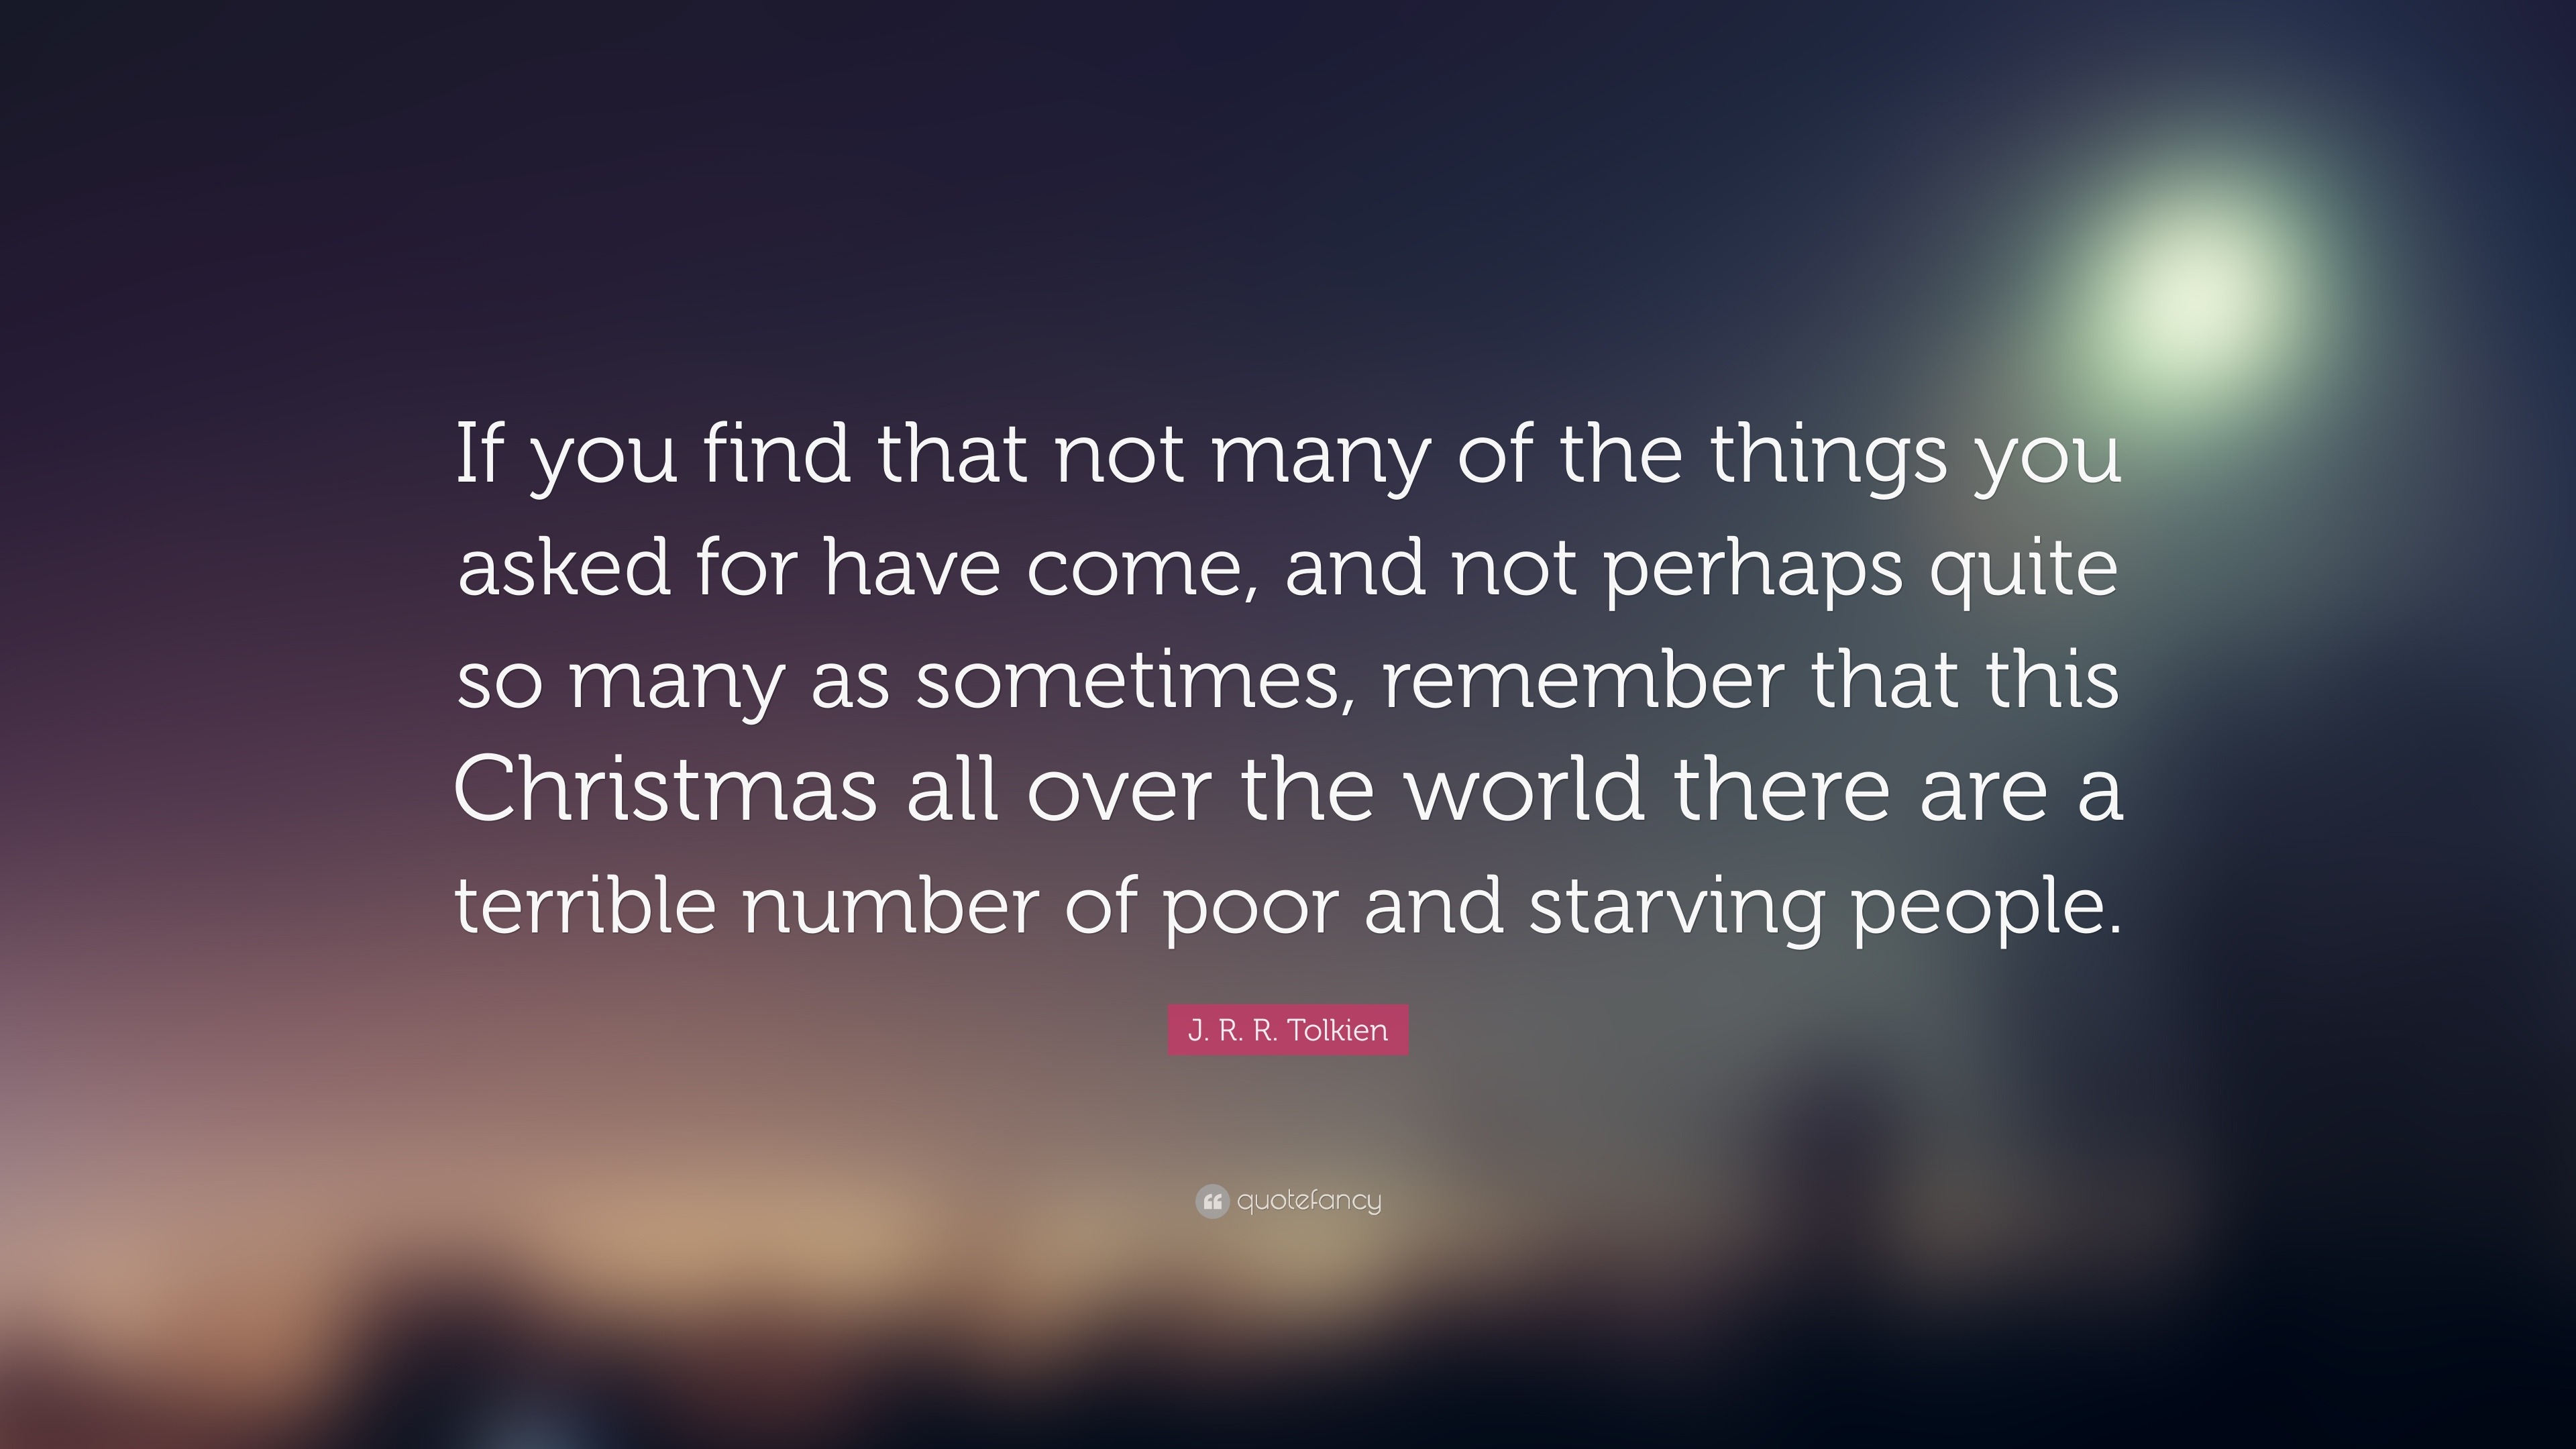 J. R. R. Tolkien Quote: “If you find that not many of the things you ...